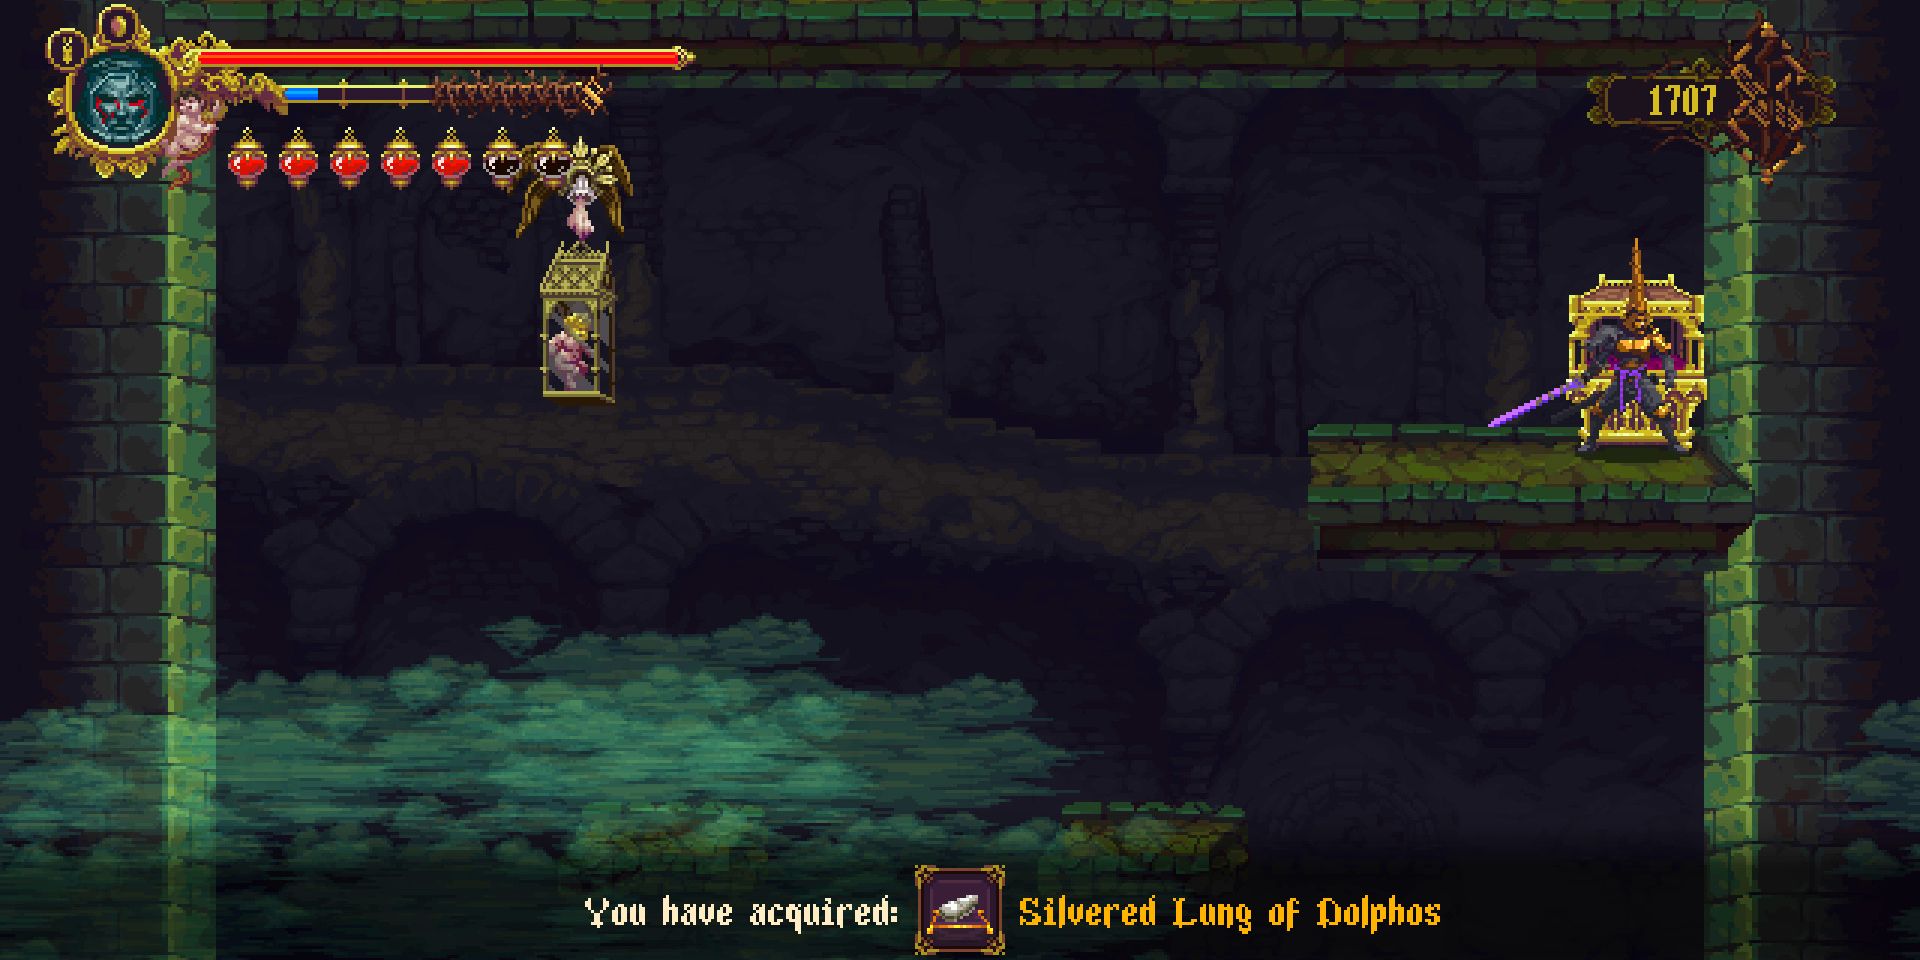 area where players find the relic that makes them immune to poison.